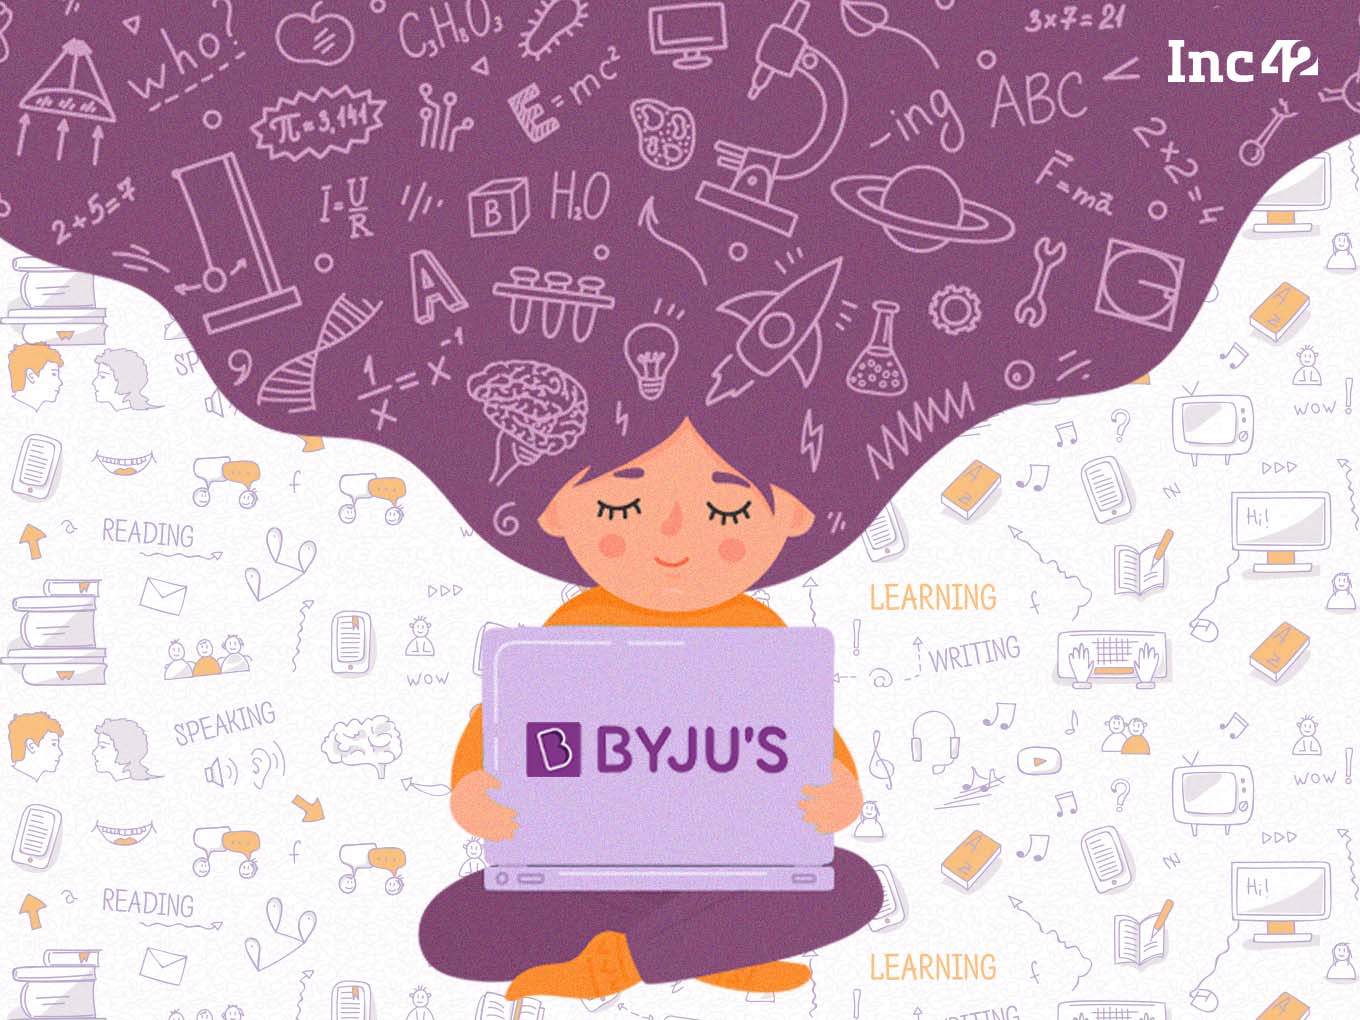 In Focus: How BYJU'S Built & Scaled Its Early Learners' Ecosystem